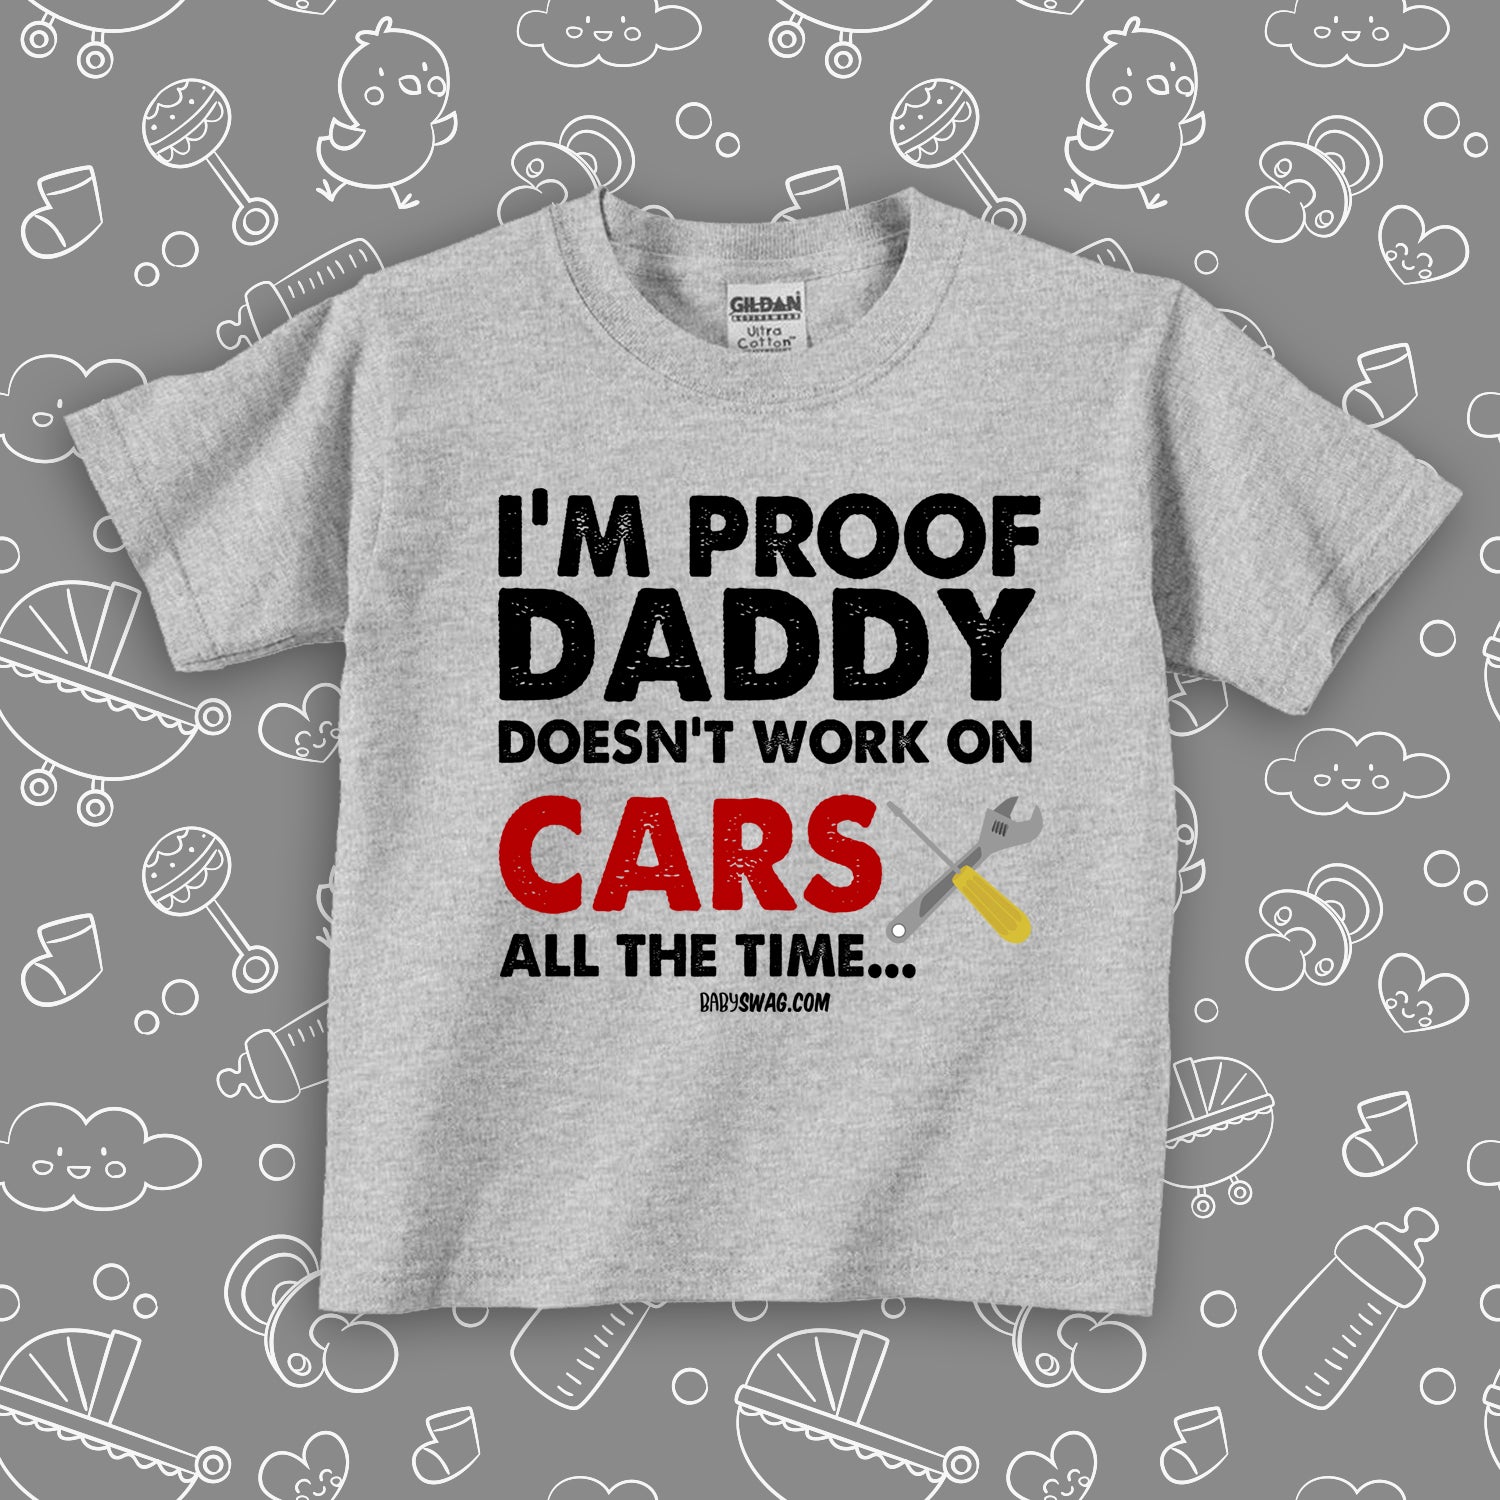 Grey cool toddler shirt saying "I'm Proof Daddy Doesn't Always Work On Cars All The Time". 